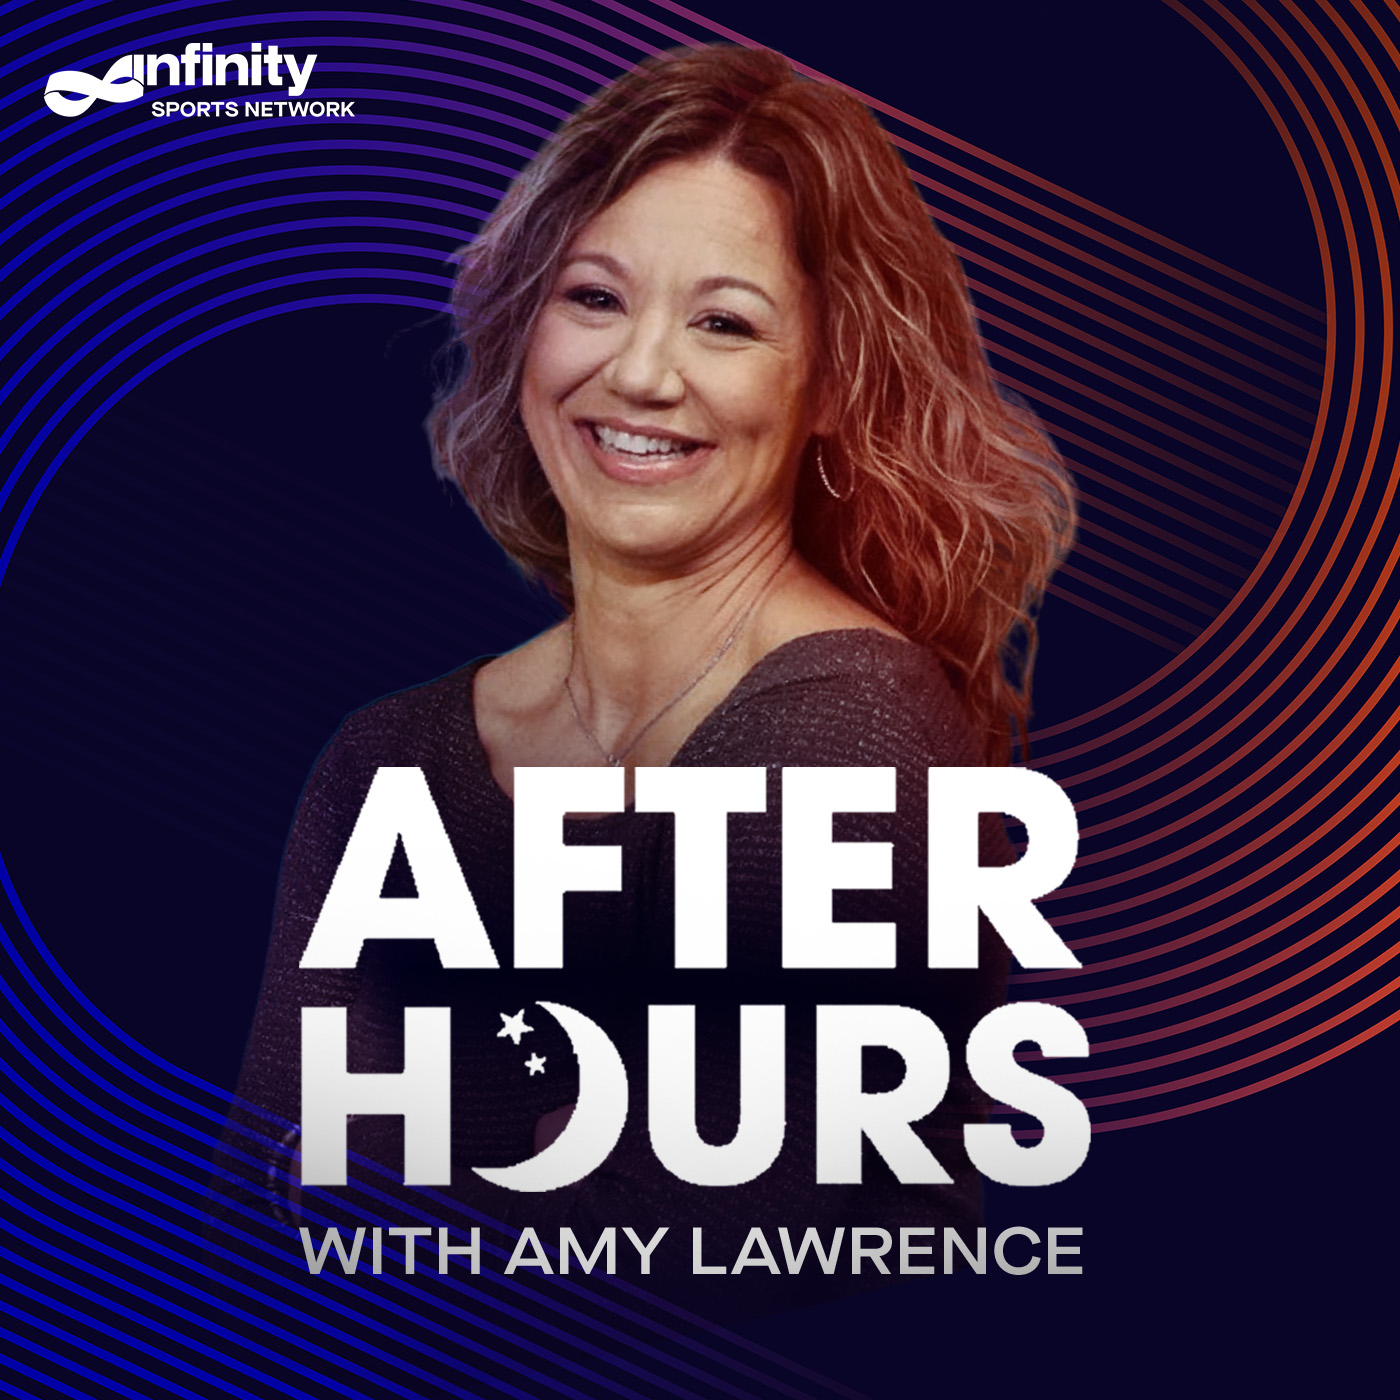 07/29/21 After Hours with Amy Lawrence PODCAST: Hour 3